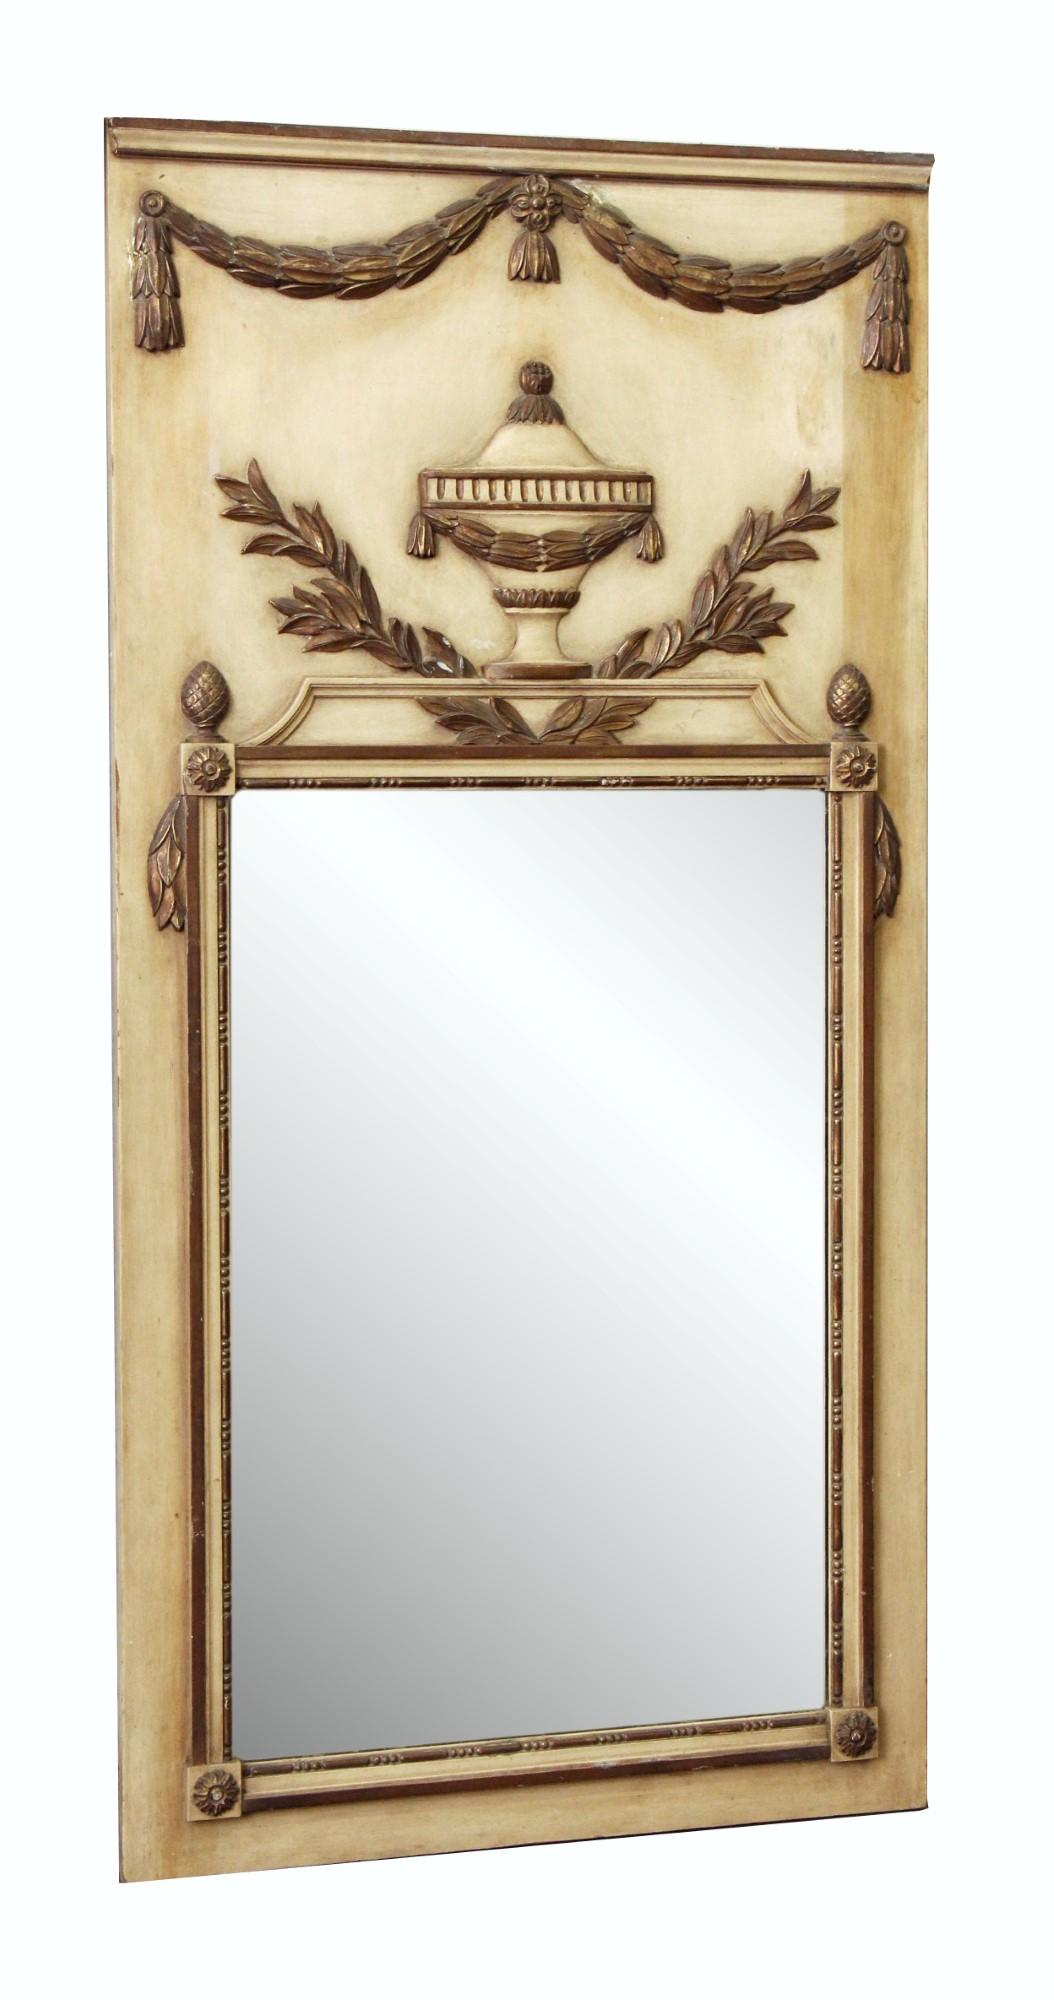 Circa 1900, gilded French trumeau over mantel mirror. The hand carved wood frame has gold gilded tassels lining the top edge and and a gold gilded leaf and urn design directly above the mirror. The background is painted an antique creme color. This